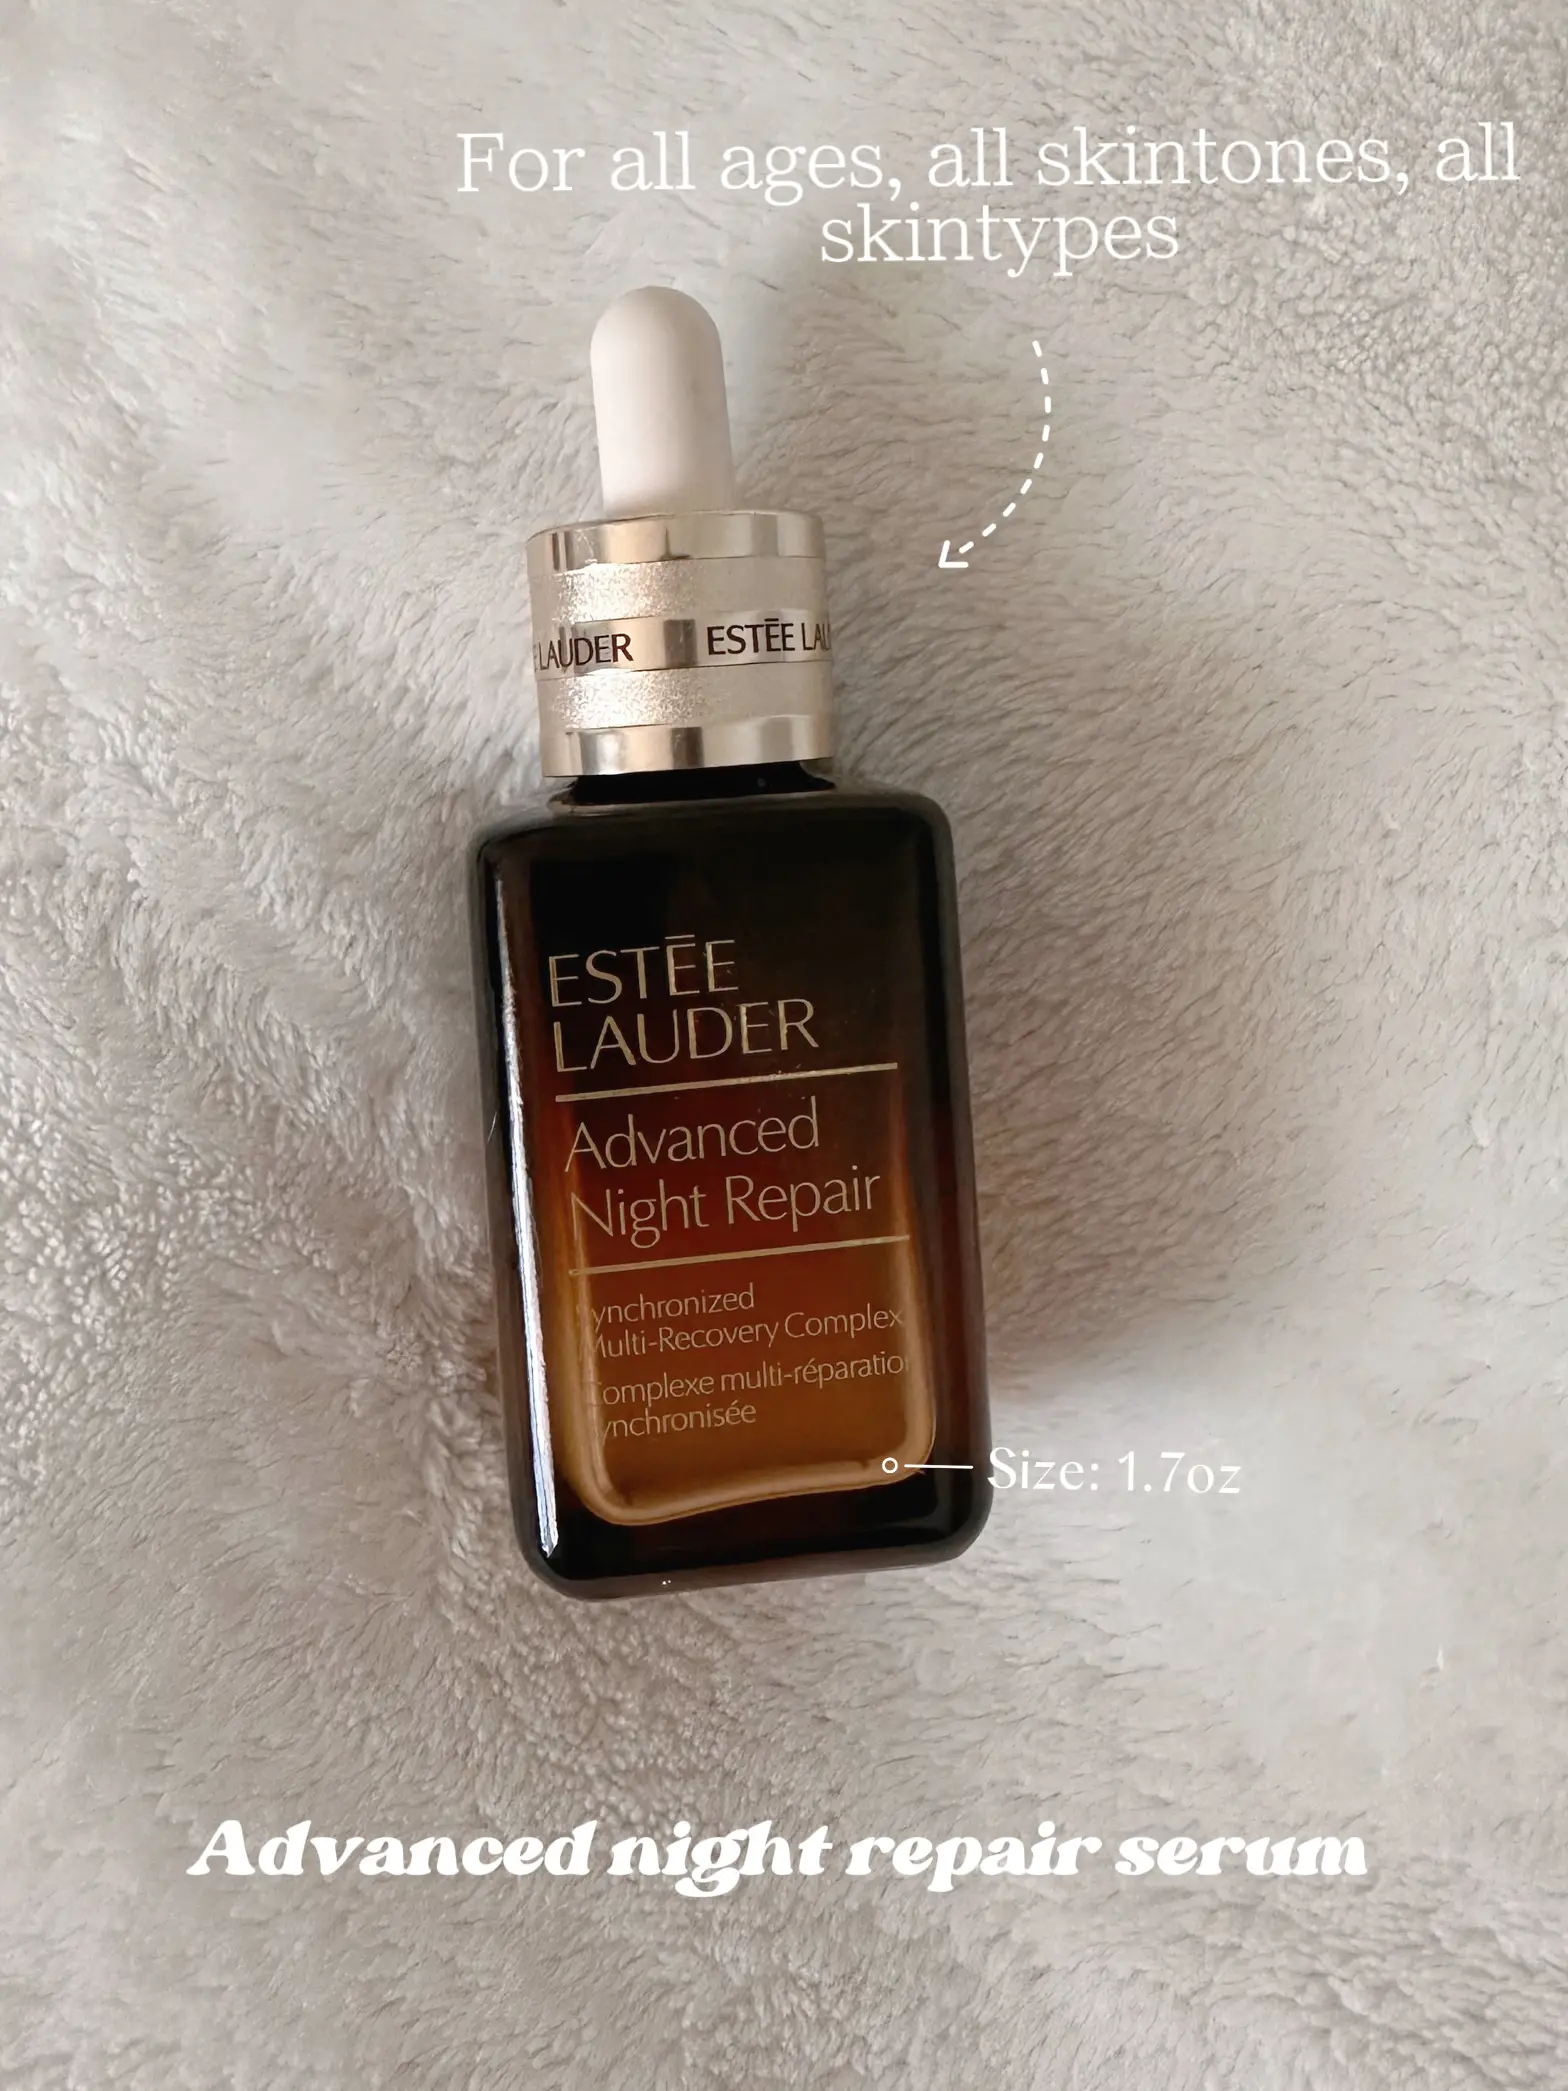 ESTEE LAUDER review, Gallery posted by Viktoriia